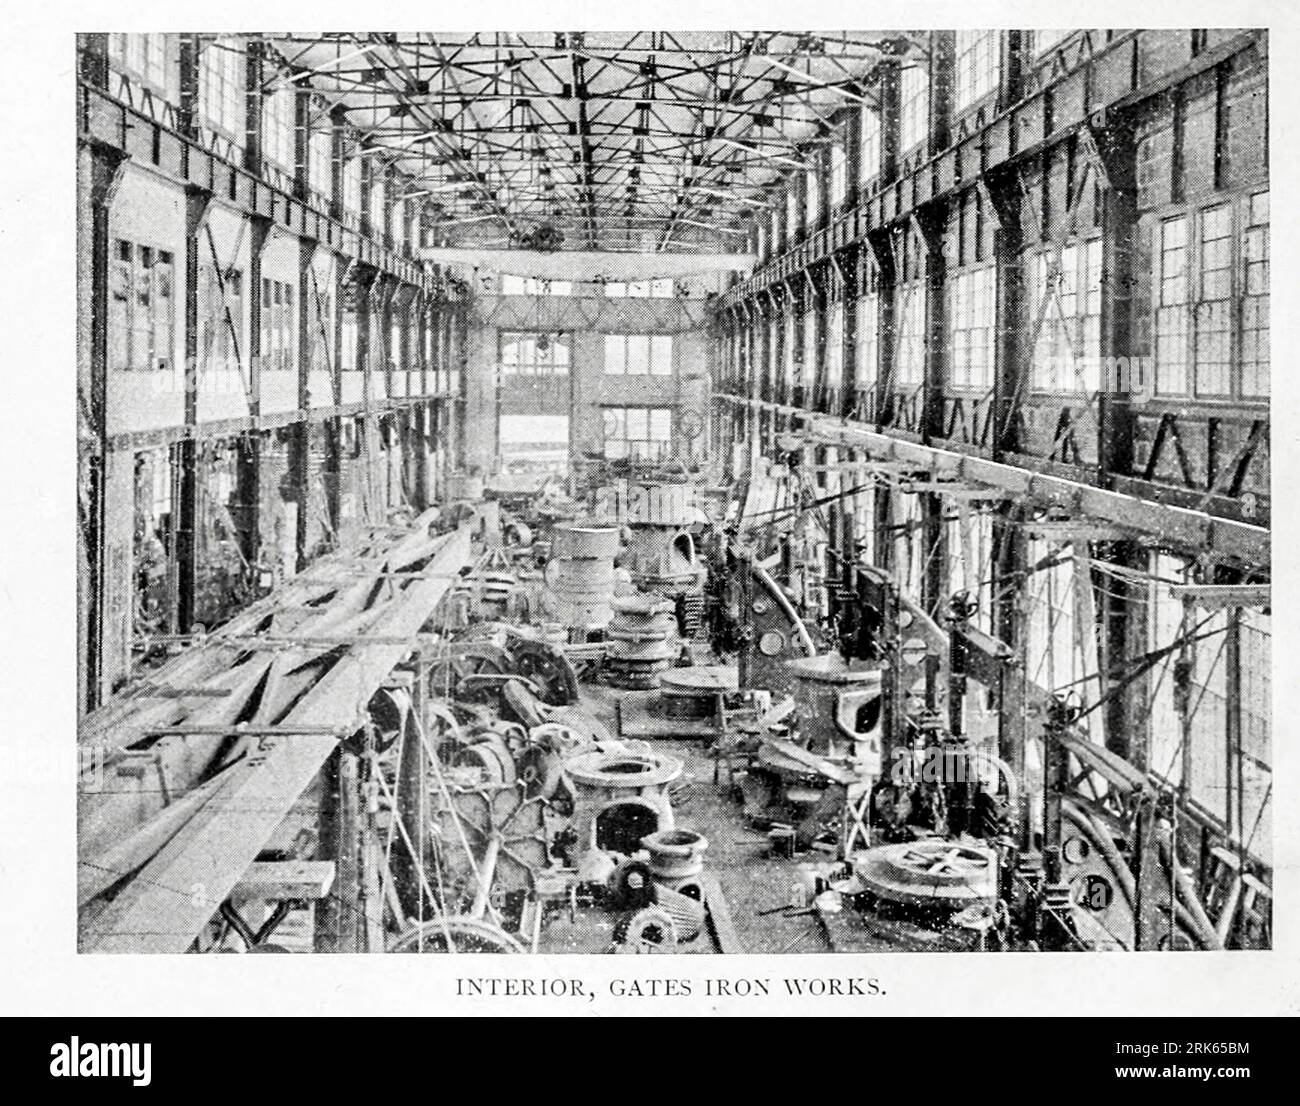 Interior Gates Iron Works, Chicago, Illinois from the Article MODERN MACHINE-SHOP ECONOMICS PRIME REQUISITES OF SHOP CONSTRUCTION By Horace L. Arnold from The Engineering Magazine DEVOTED TO INDUSTRIAL PROGRESS Volume XI October 1896 NEW YORK The Engineering Magazine Co Stock Photo